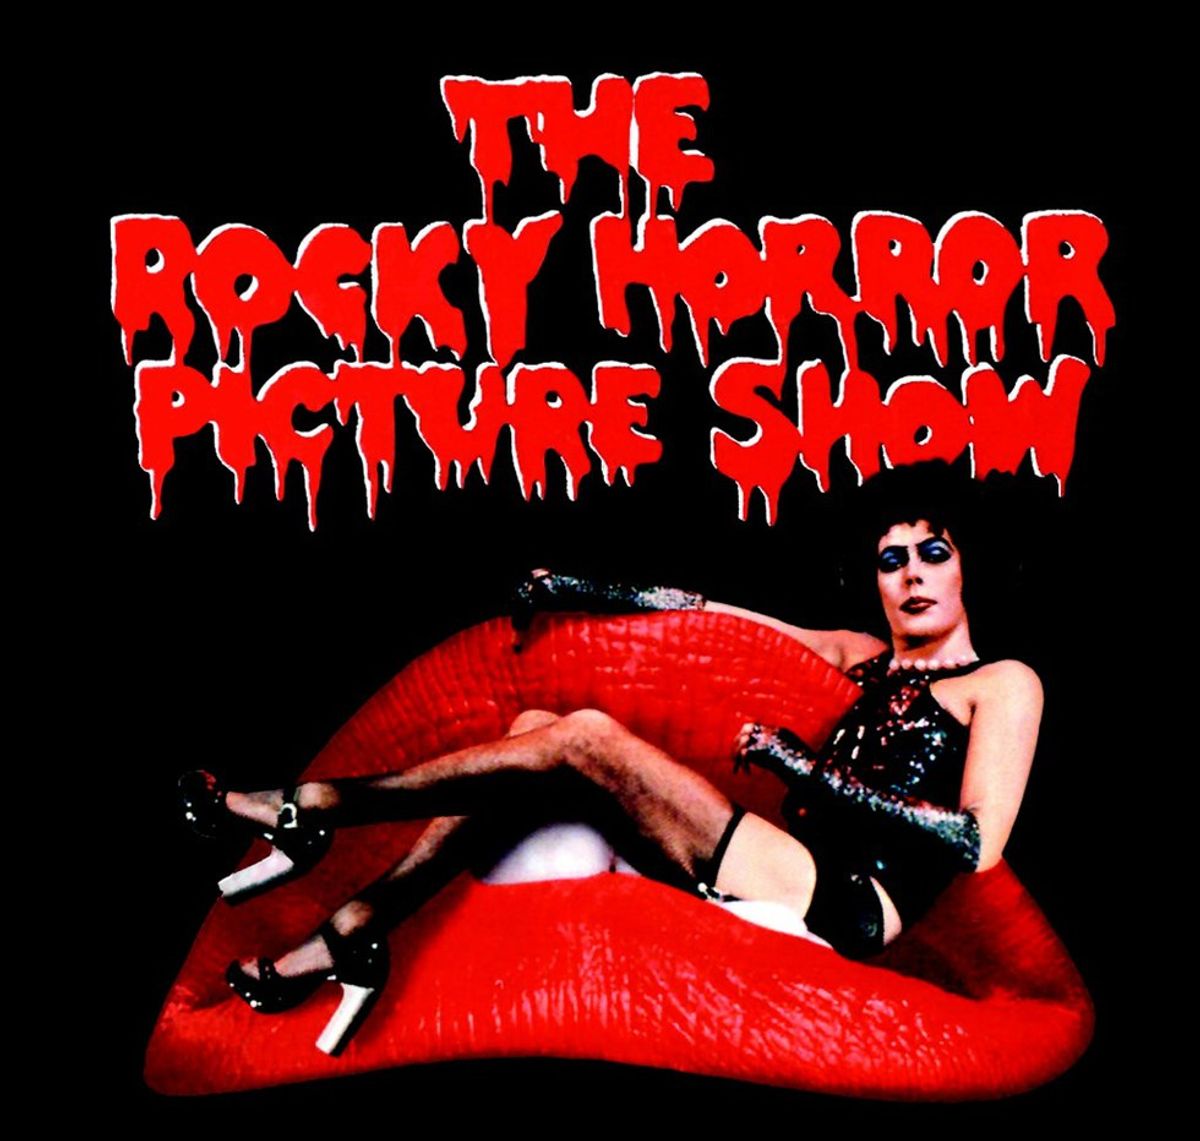 It's Almost Halloween, Which Means It's Almost Time For 'The Rocky Horror Picture Show'